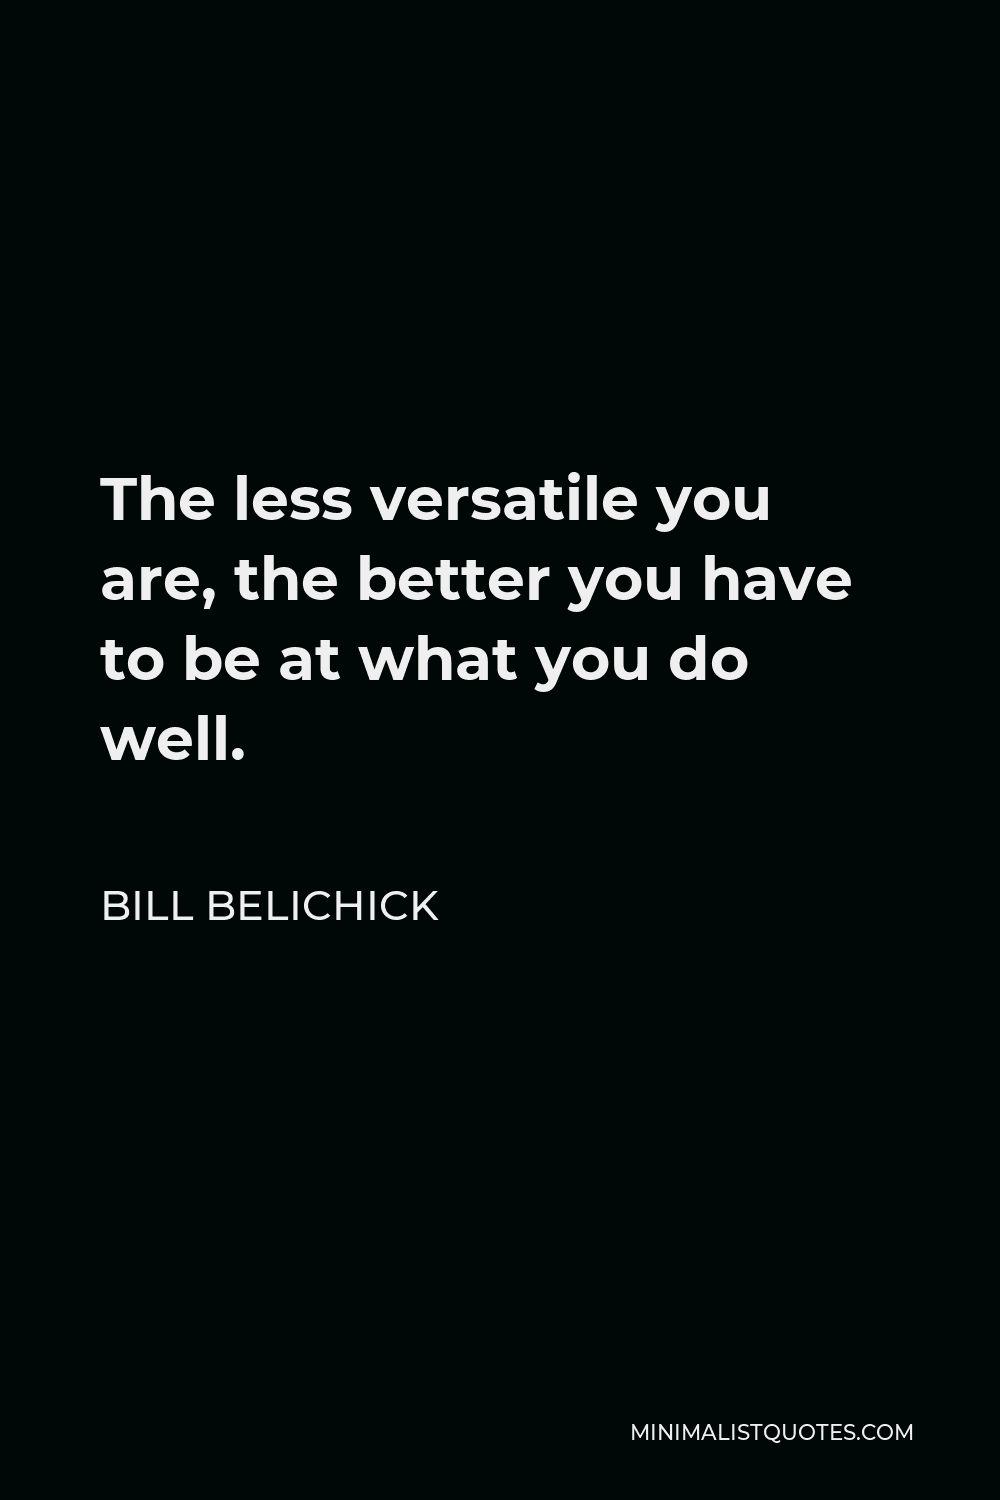 Bill Belichick Quote - The less versatile you are, the better you have to be at what you do well.